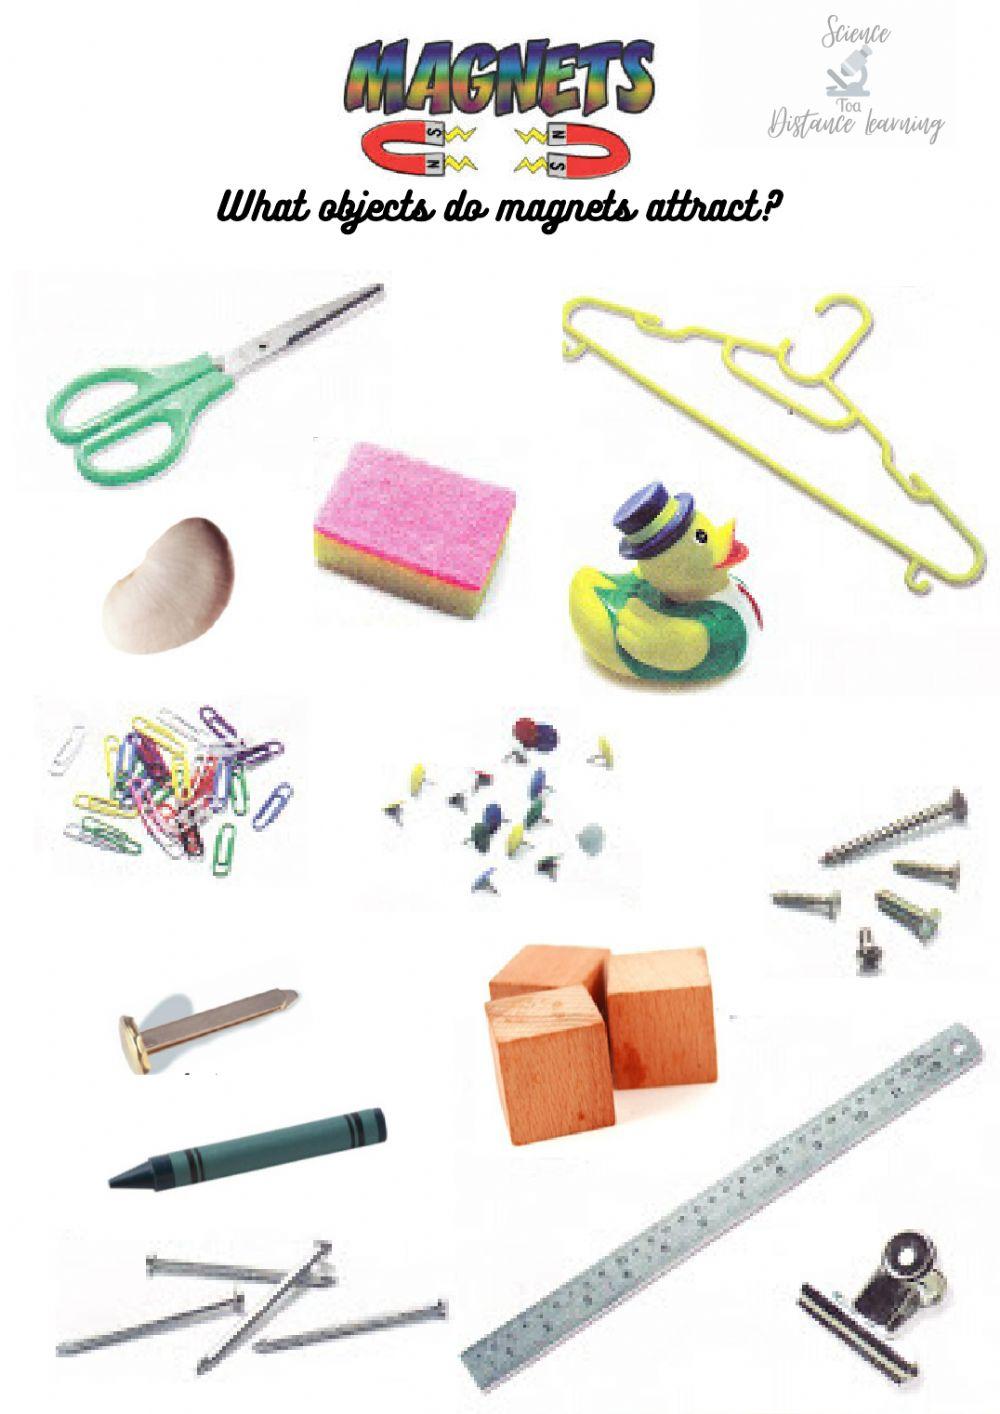 What objects magnets attract